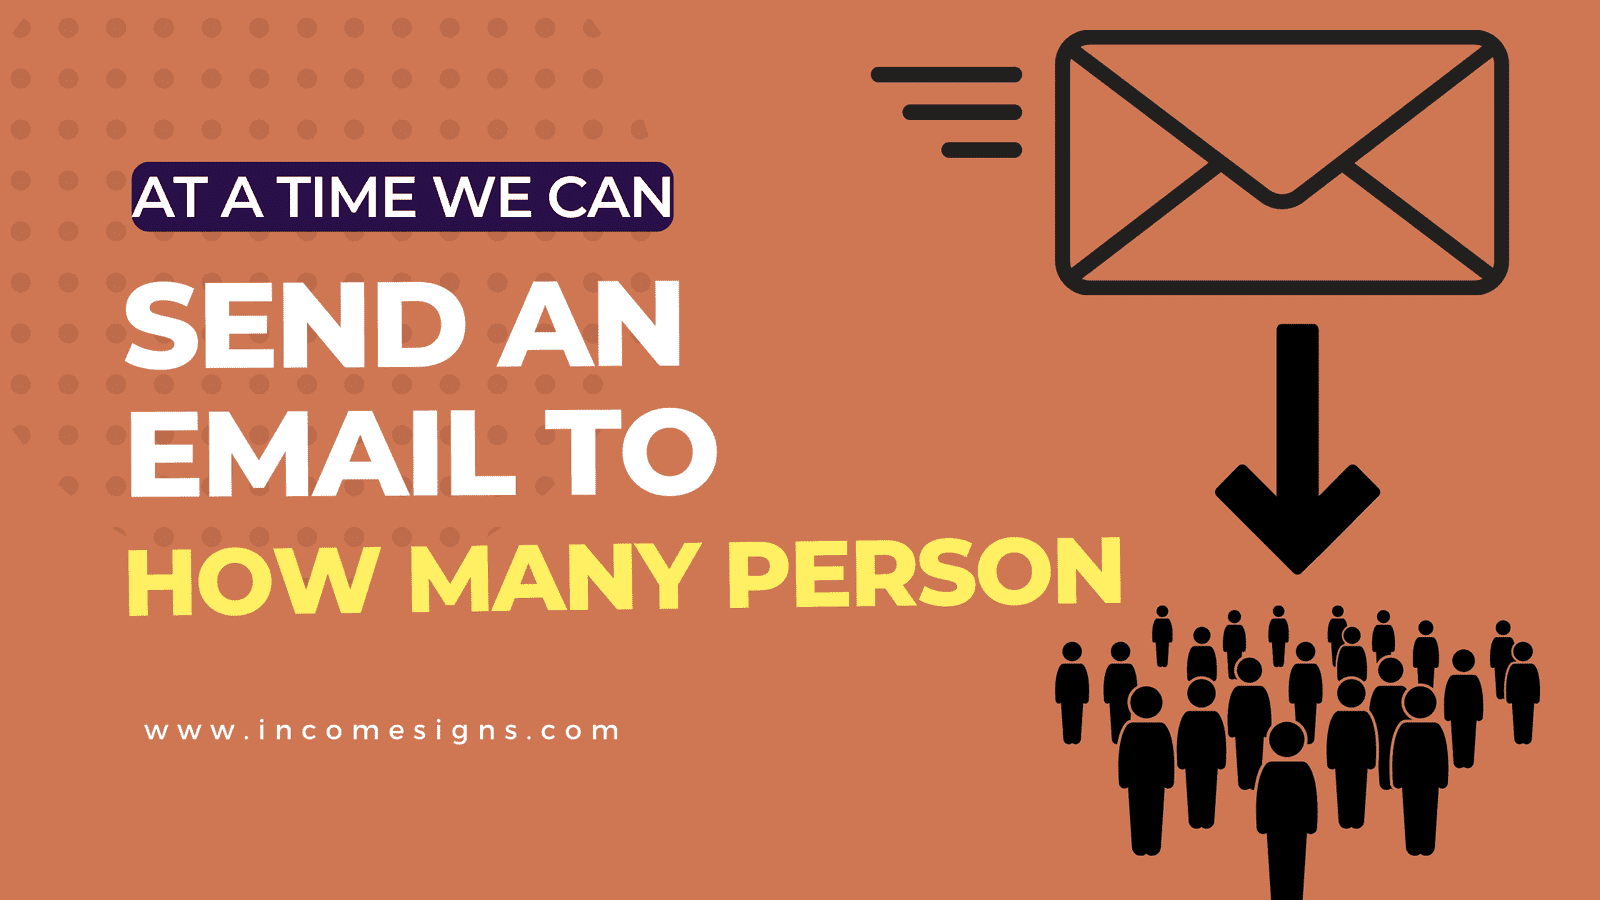 At a Time We Can Send an Email to How Many Person - Income Signs